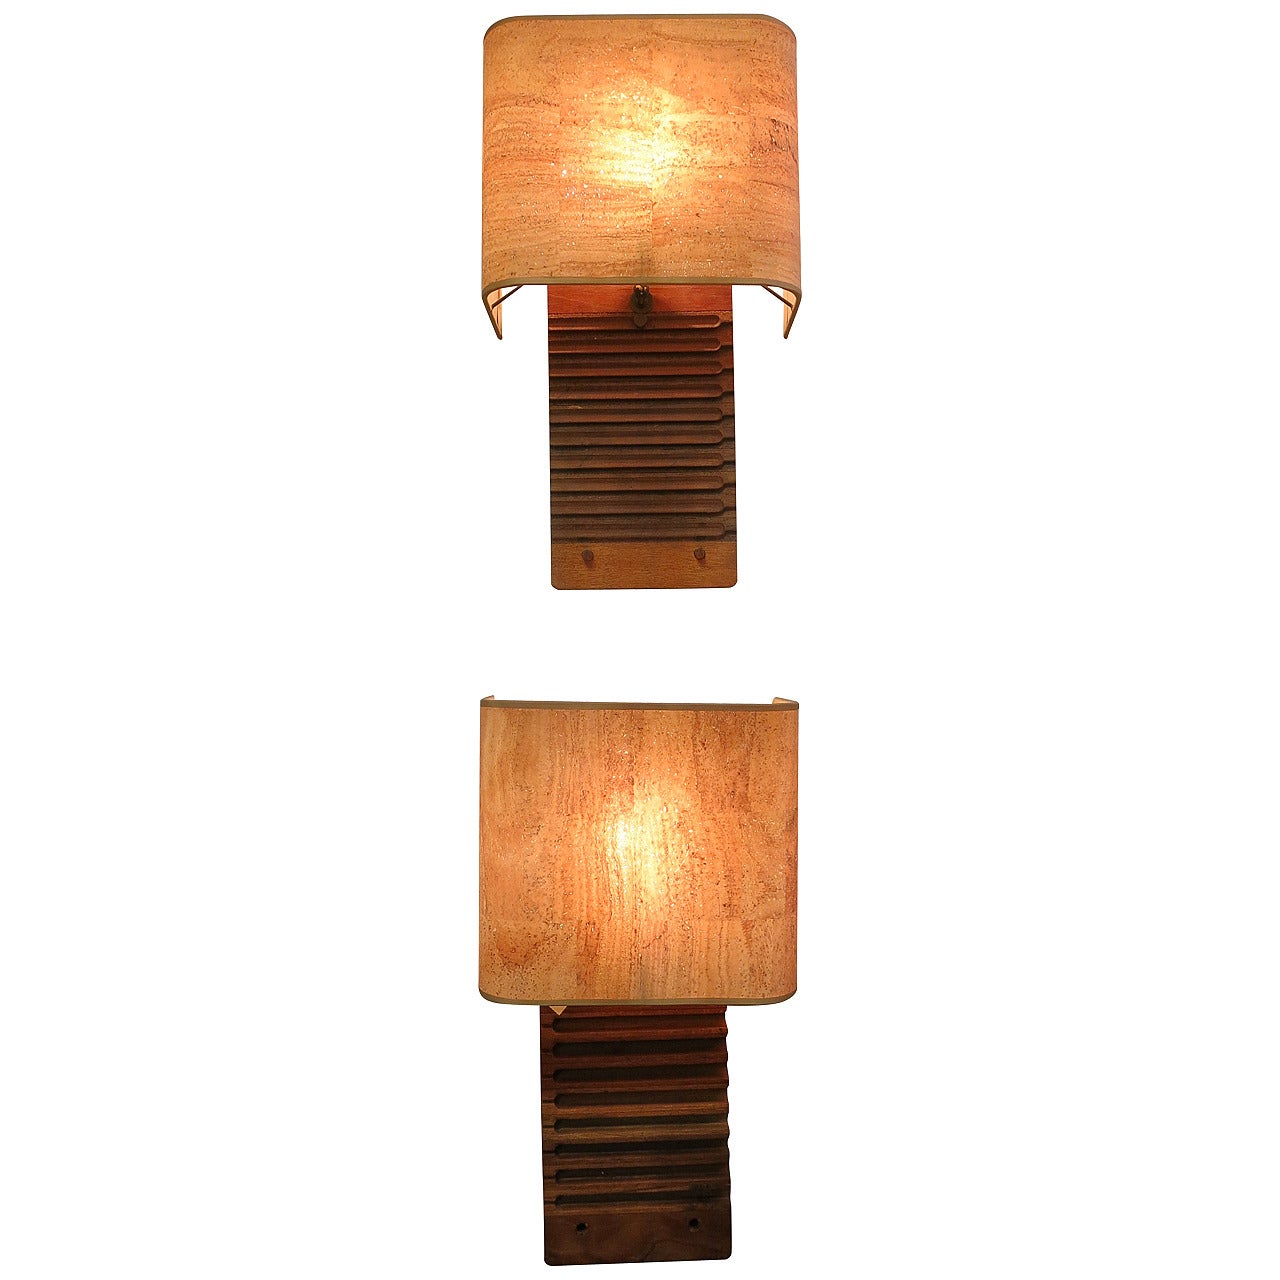 Pair of Cigar Mold Sconces